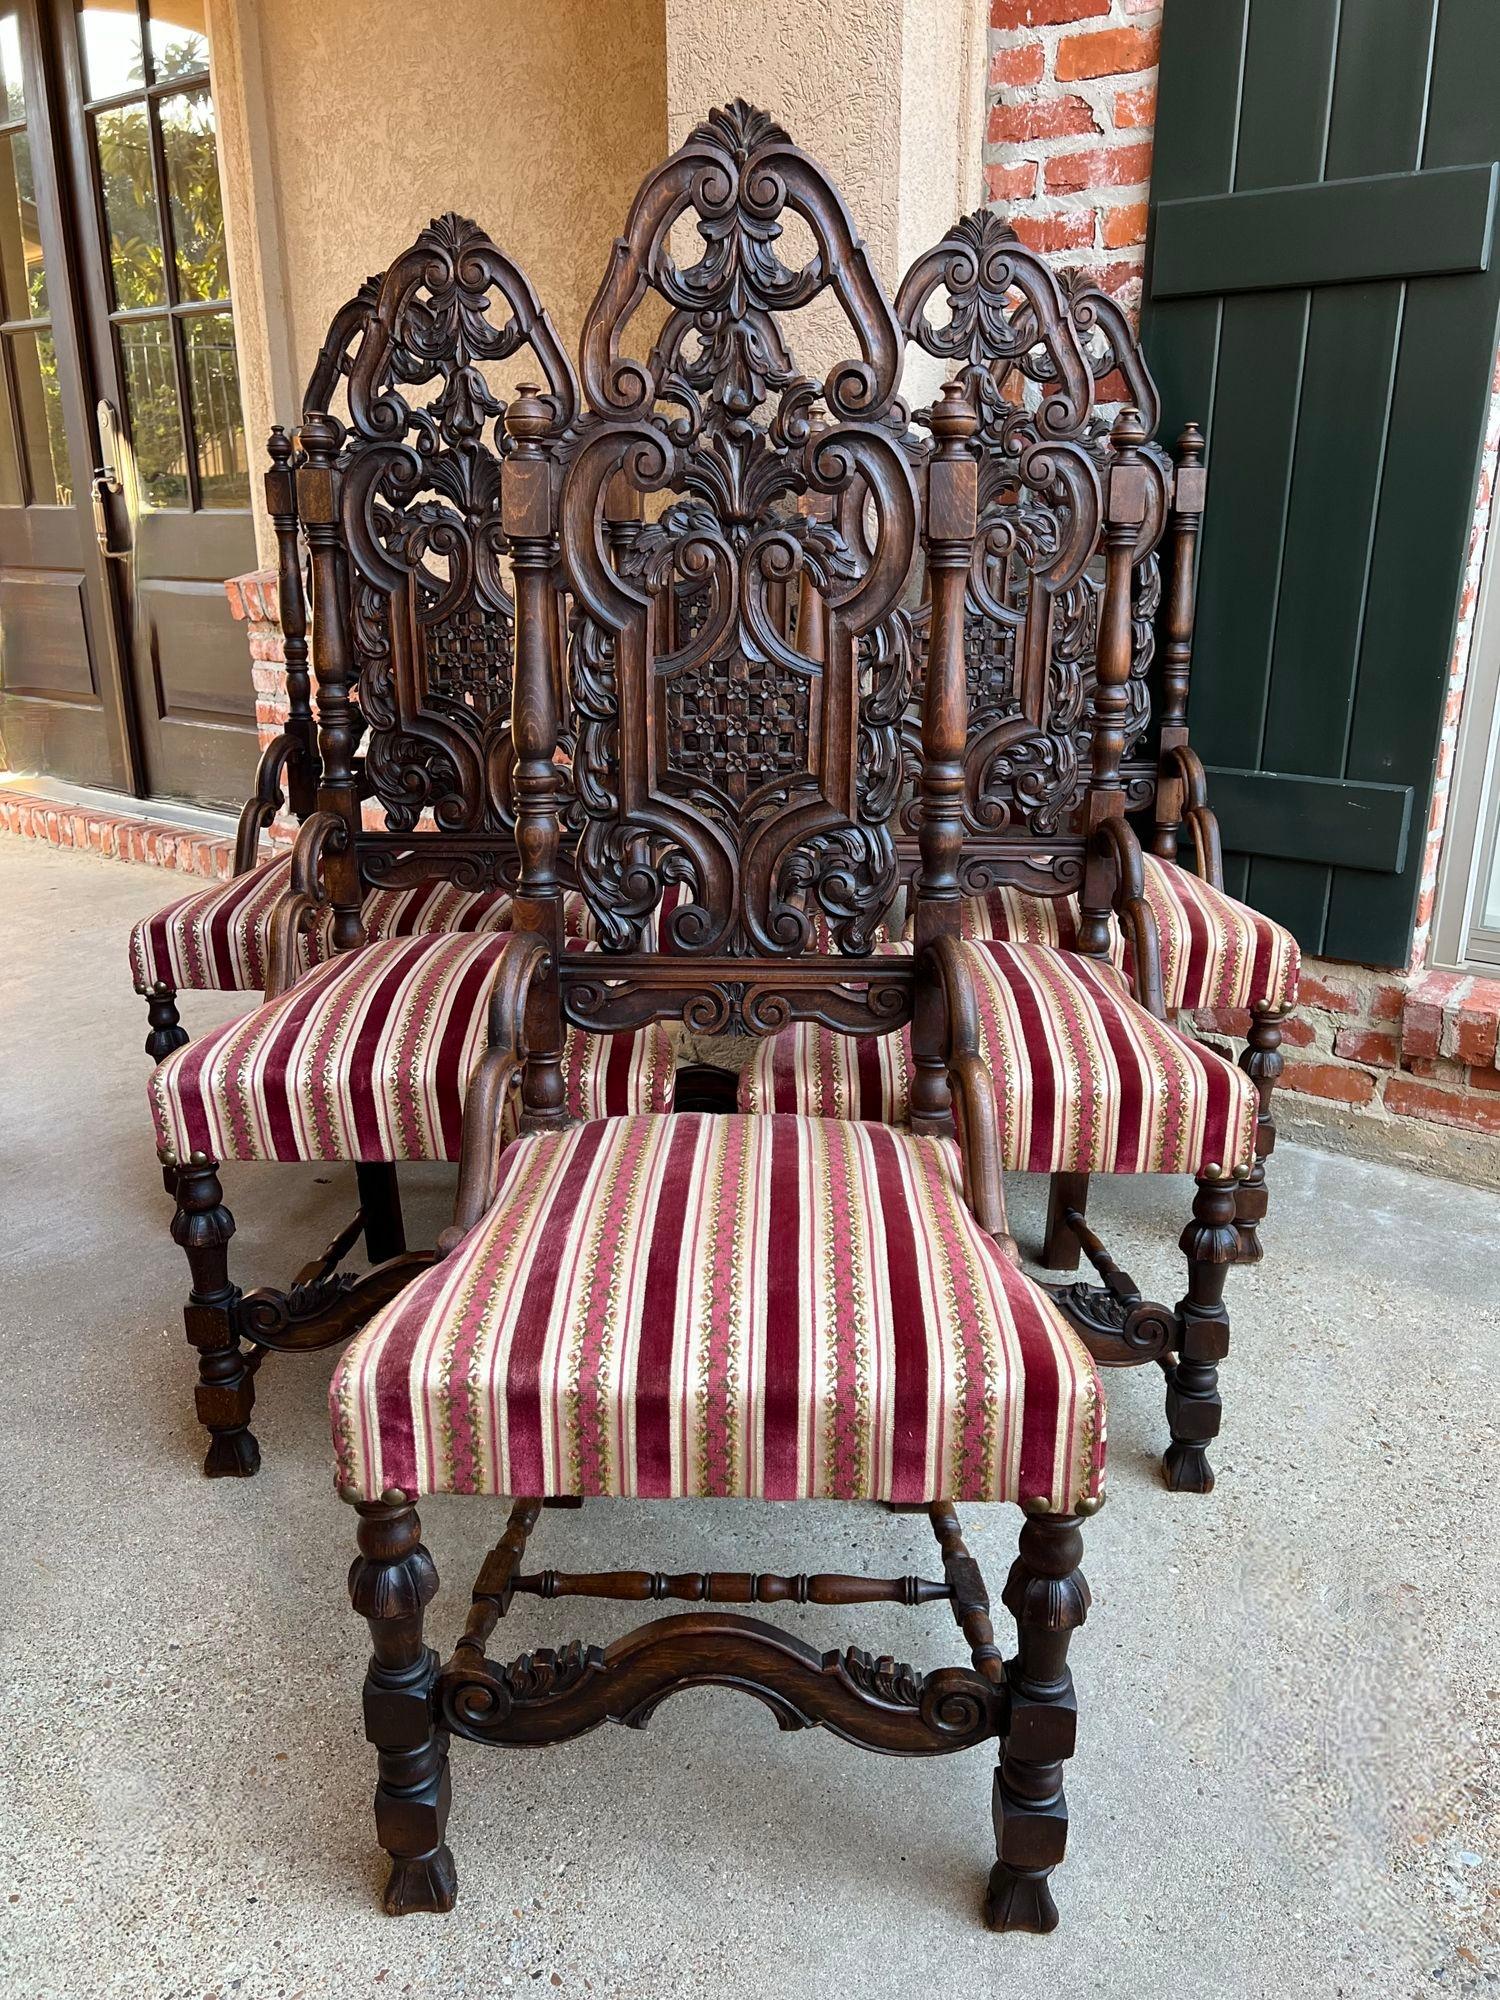 Set 6 Antique French Dining Chairs Renaissance Revival Tall Open Carved Oak.

Direct from France, a superb set of SIX antique dining chairs! The chairs are quite majestic in appearance with a very tall height of 52.75” and feature ornate, open